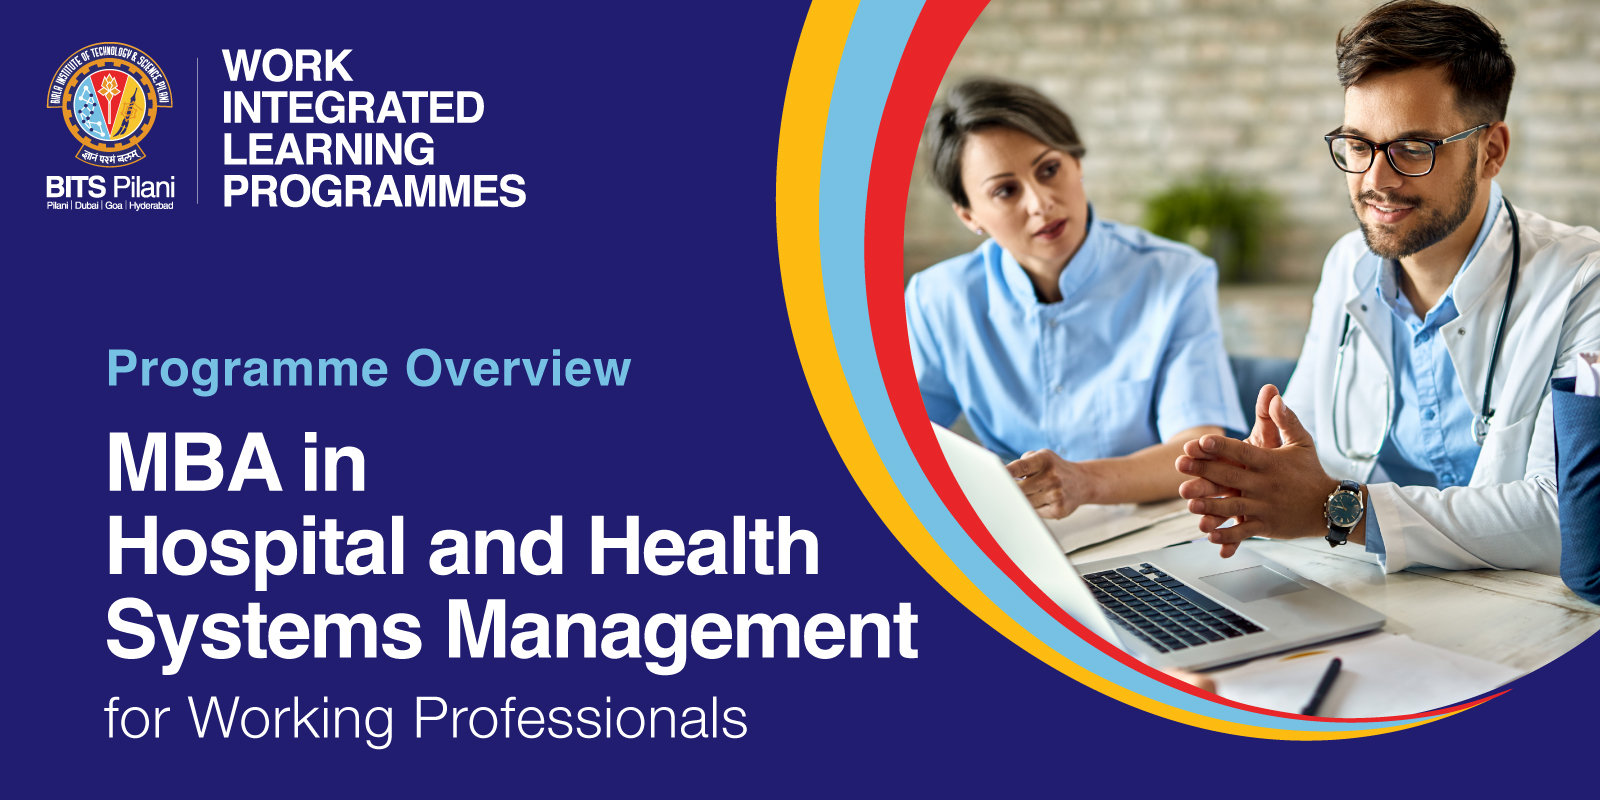 MBA in Hospital and Health Systems Management Video